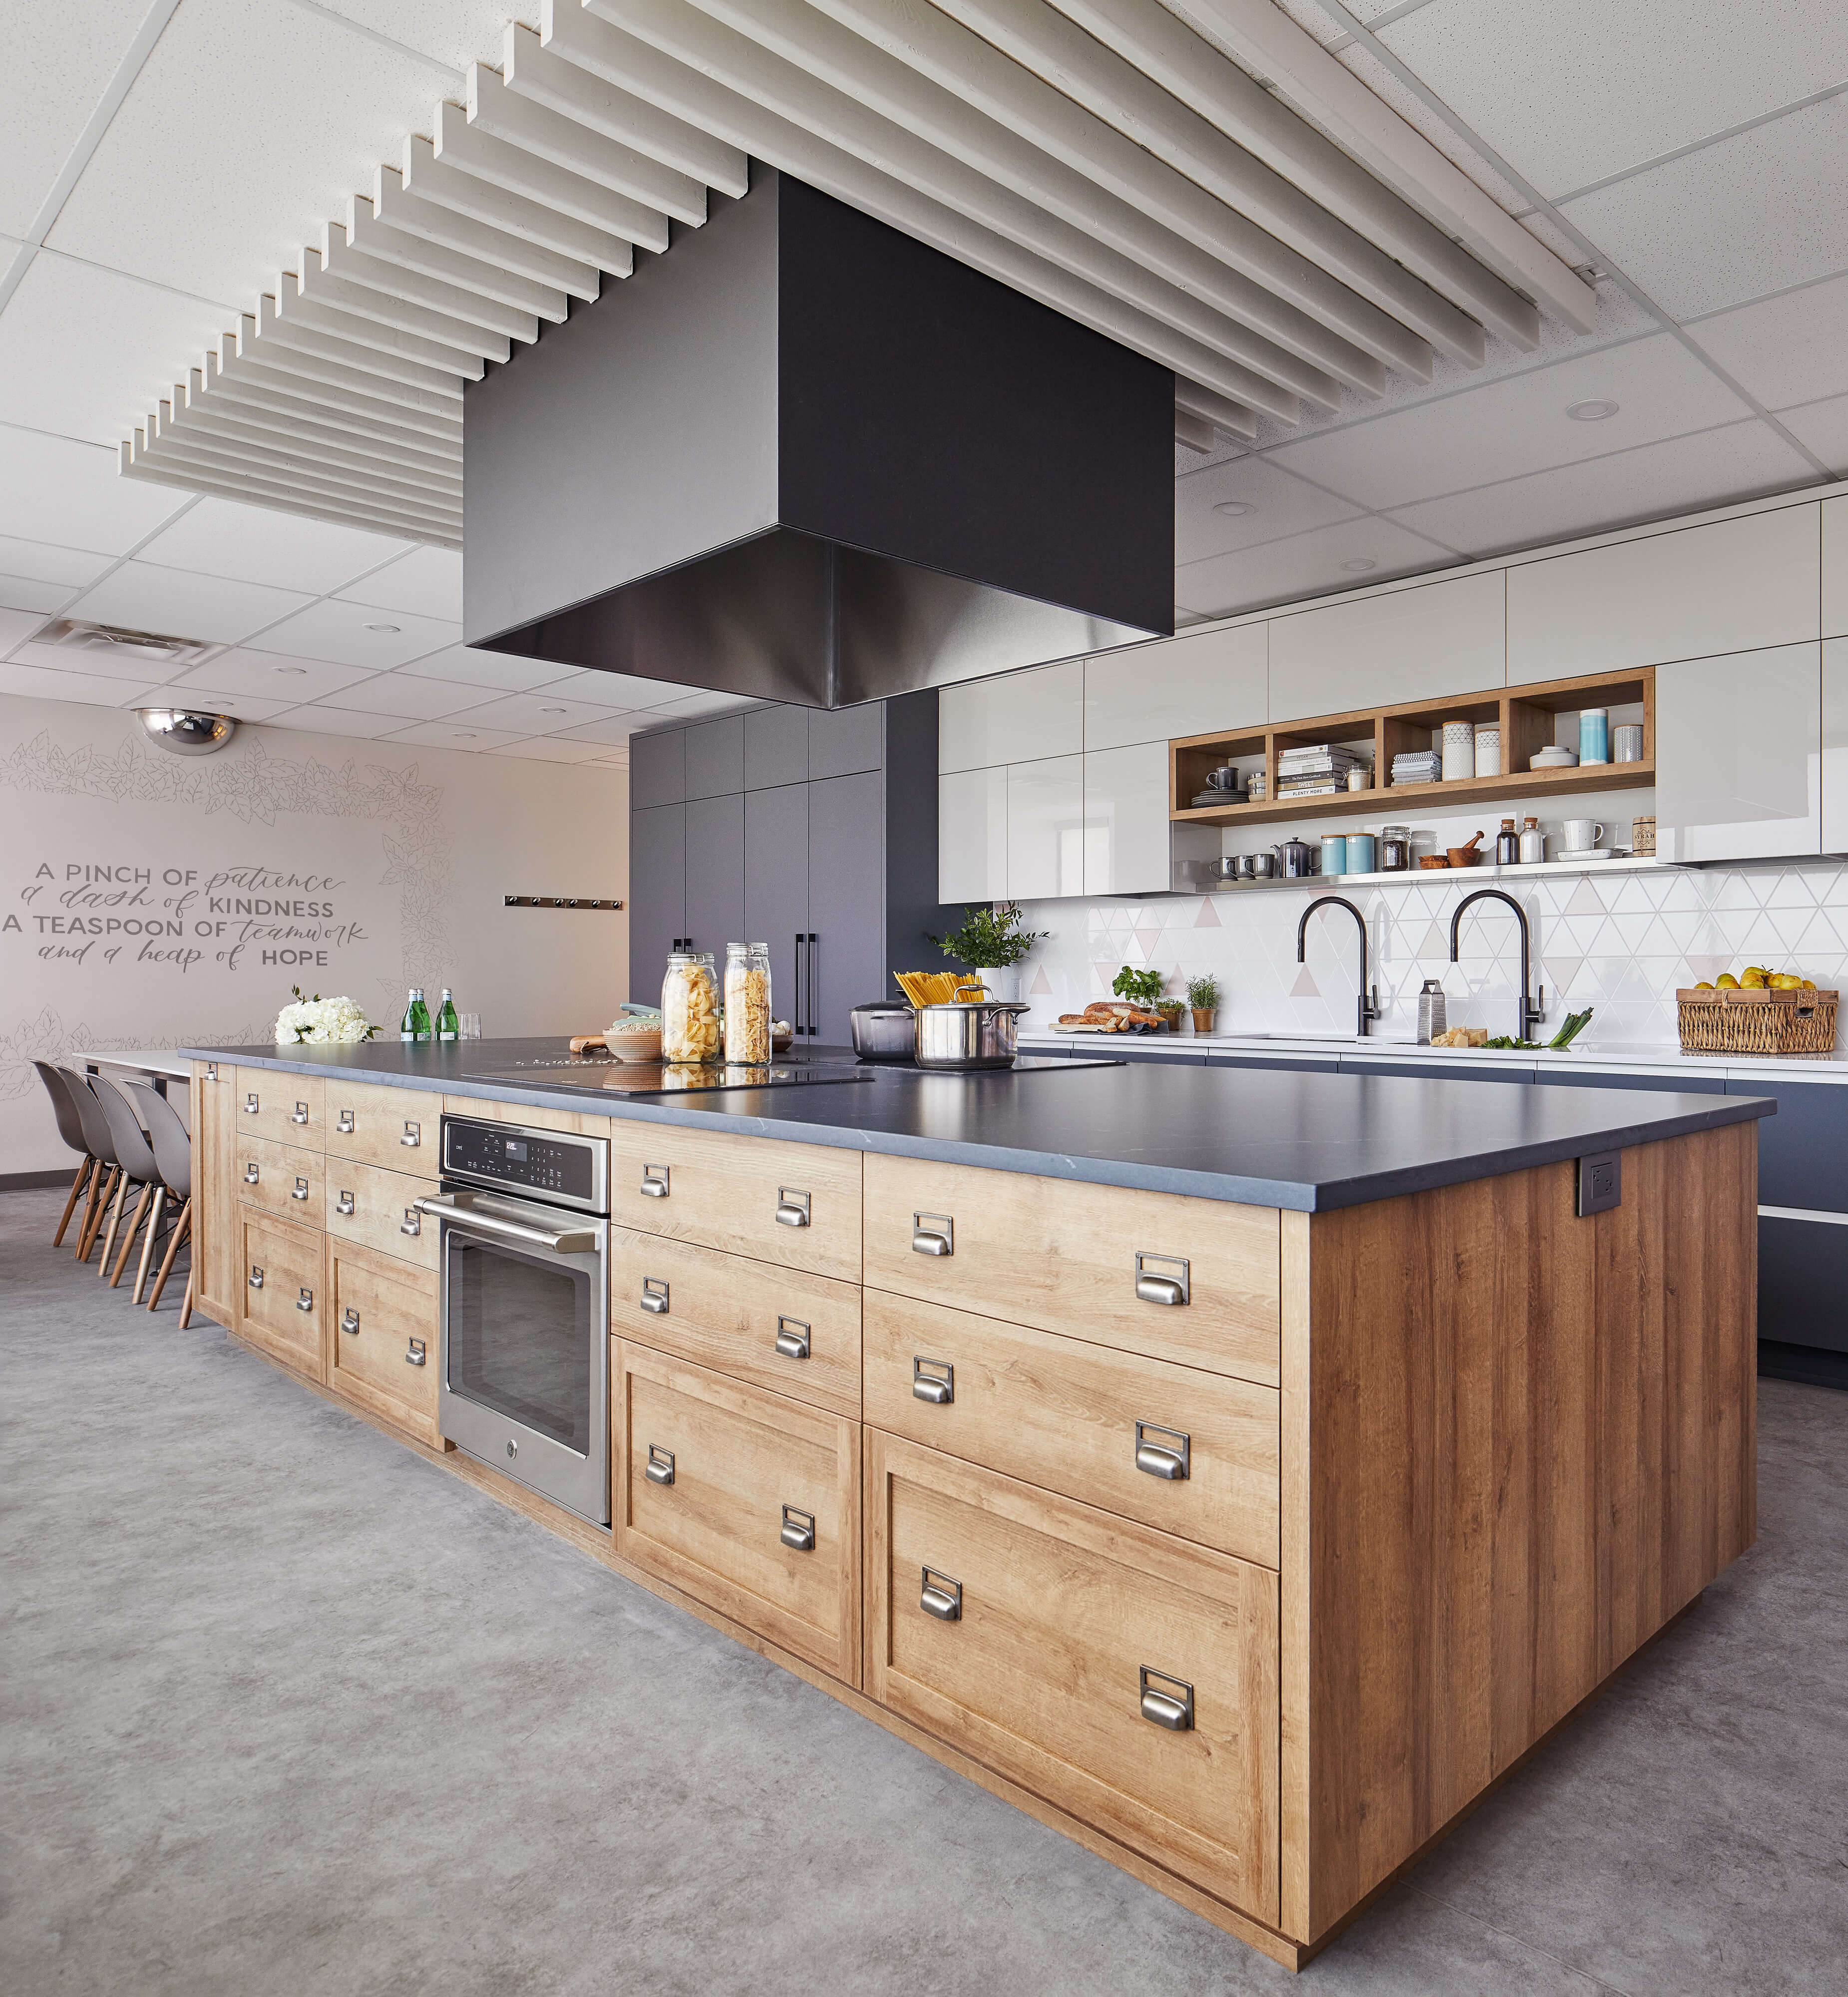 A Royal Kitchen Kitchen Design Photography For Astro Design